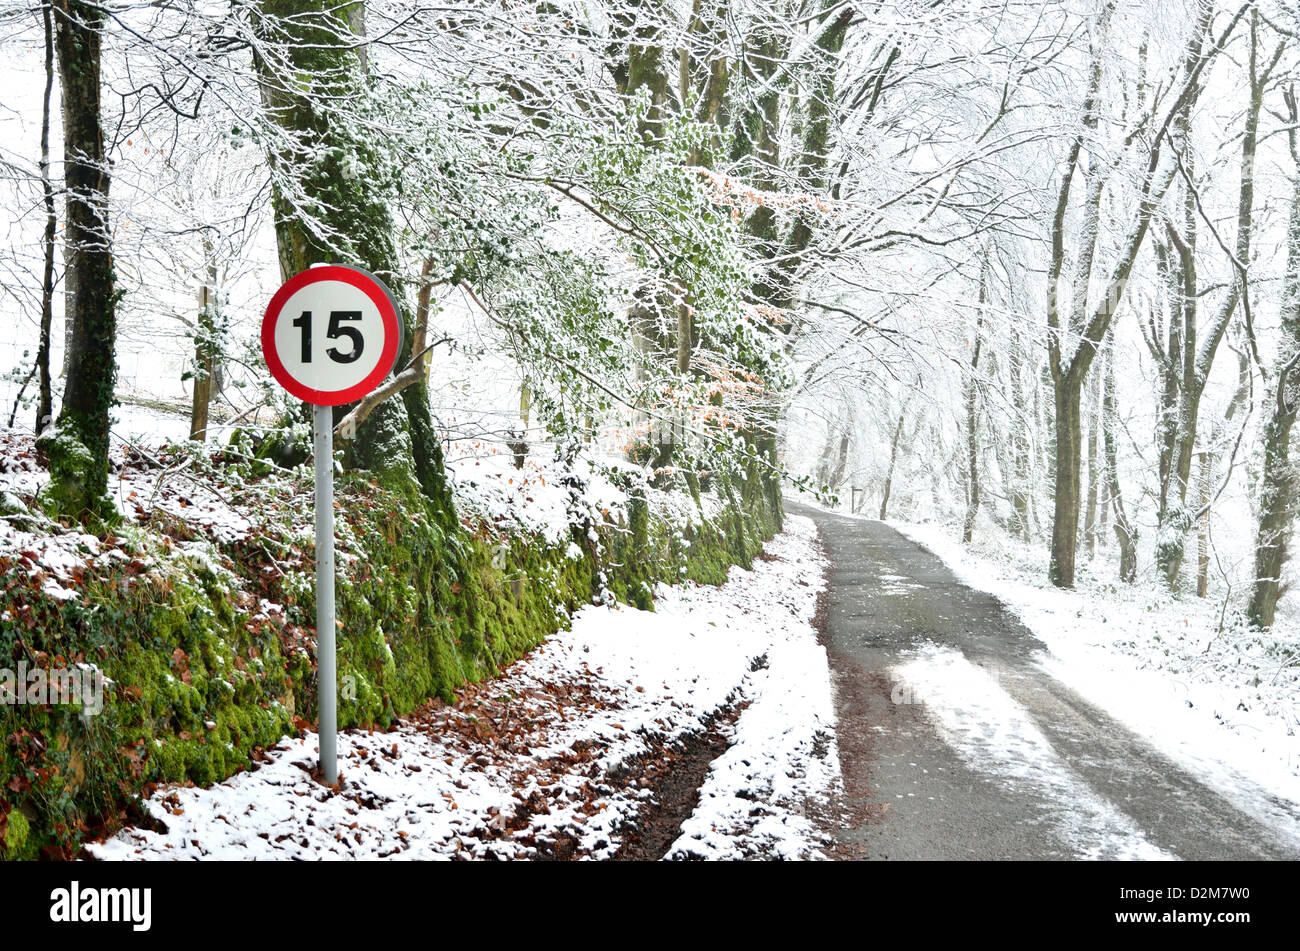 A snowy road leads through a snow covered wood. The snow highlights the green of the bank and the red of the road sign Stock Photo